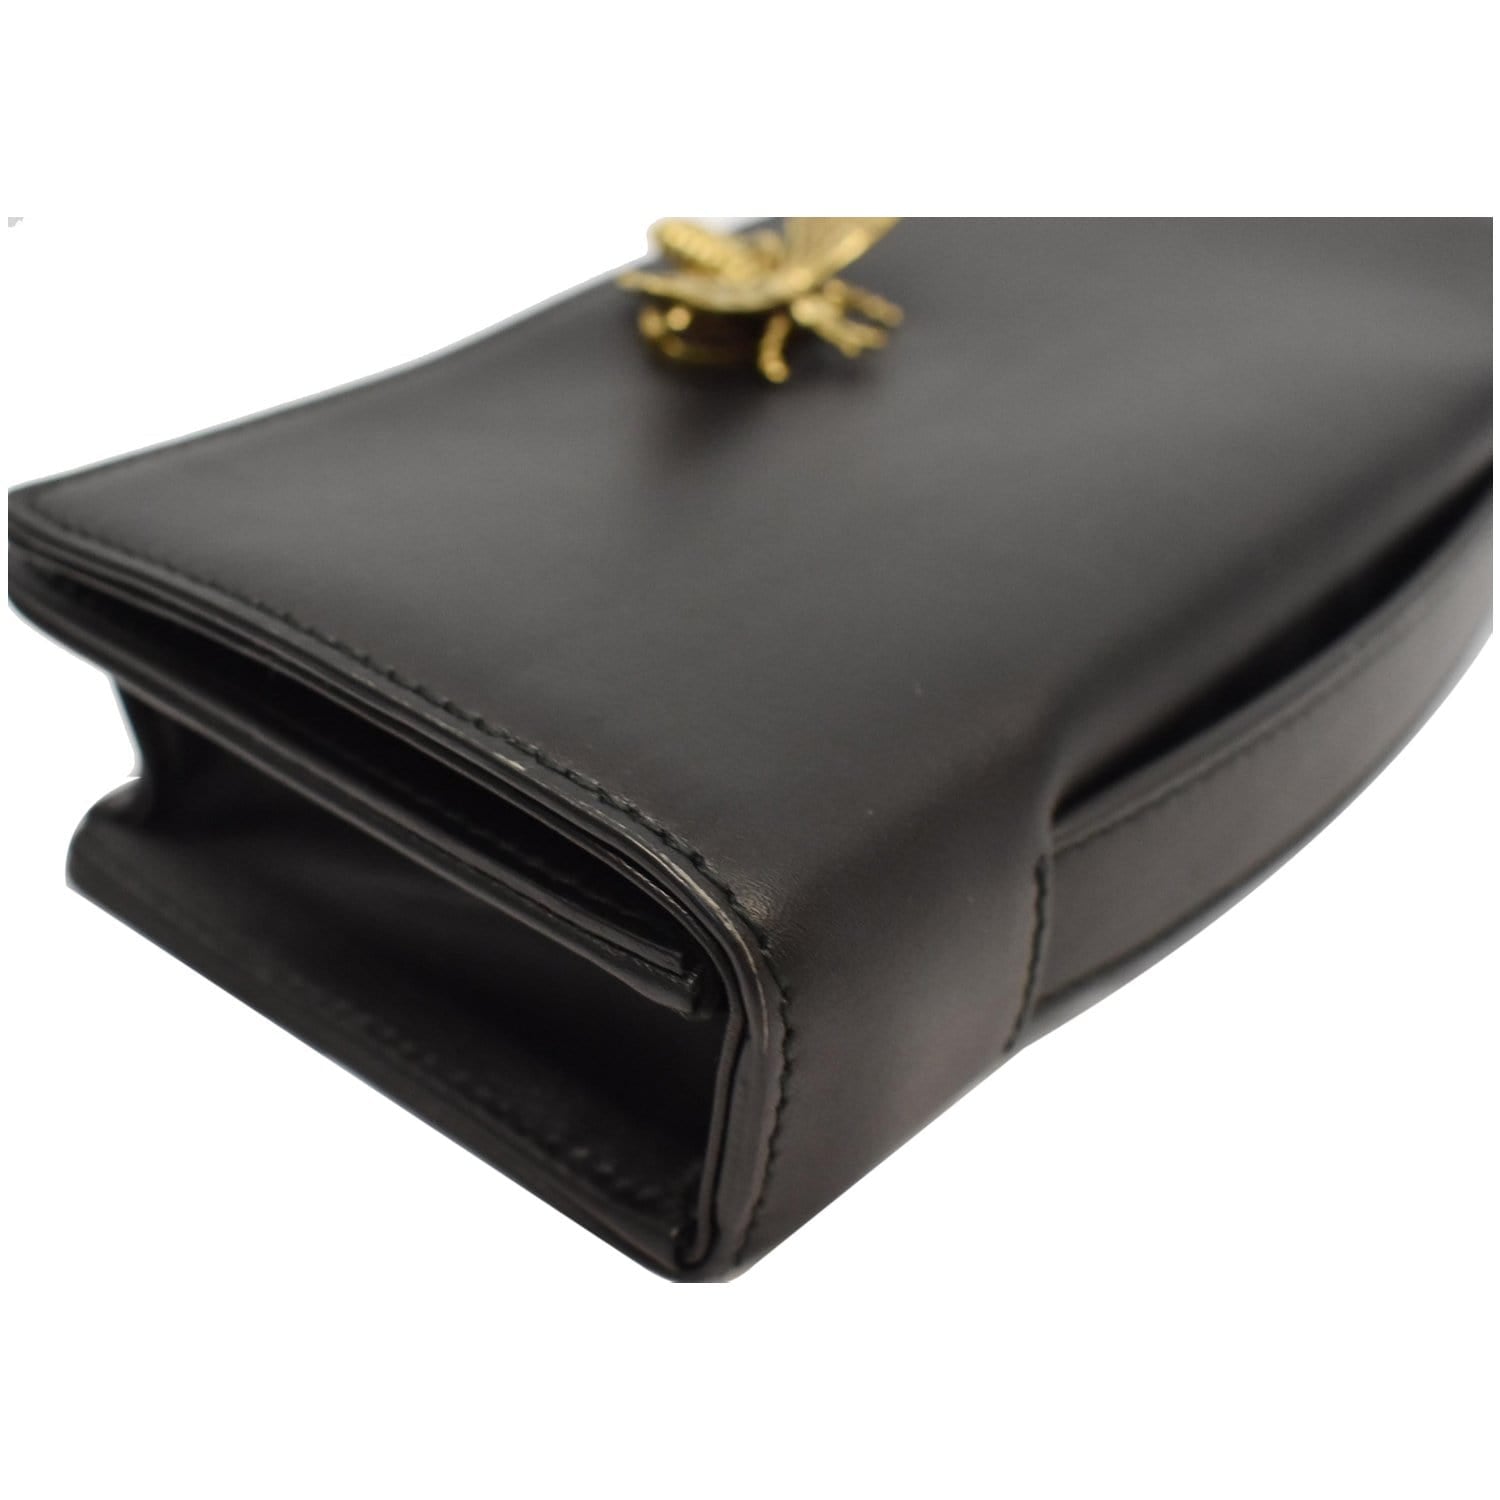 Christian Dior Authenticated Clutch Bag